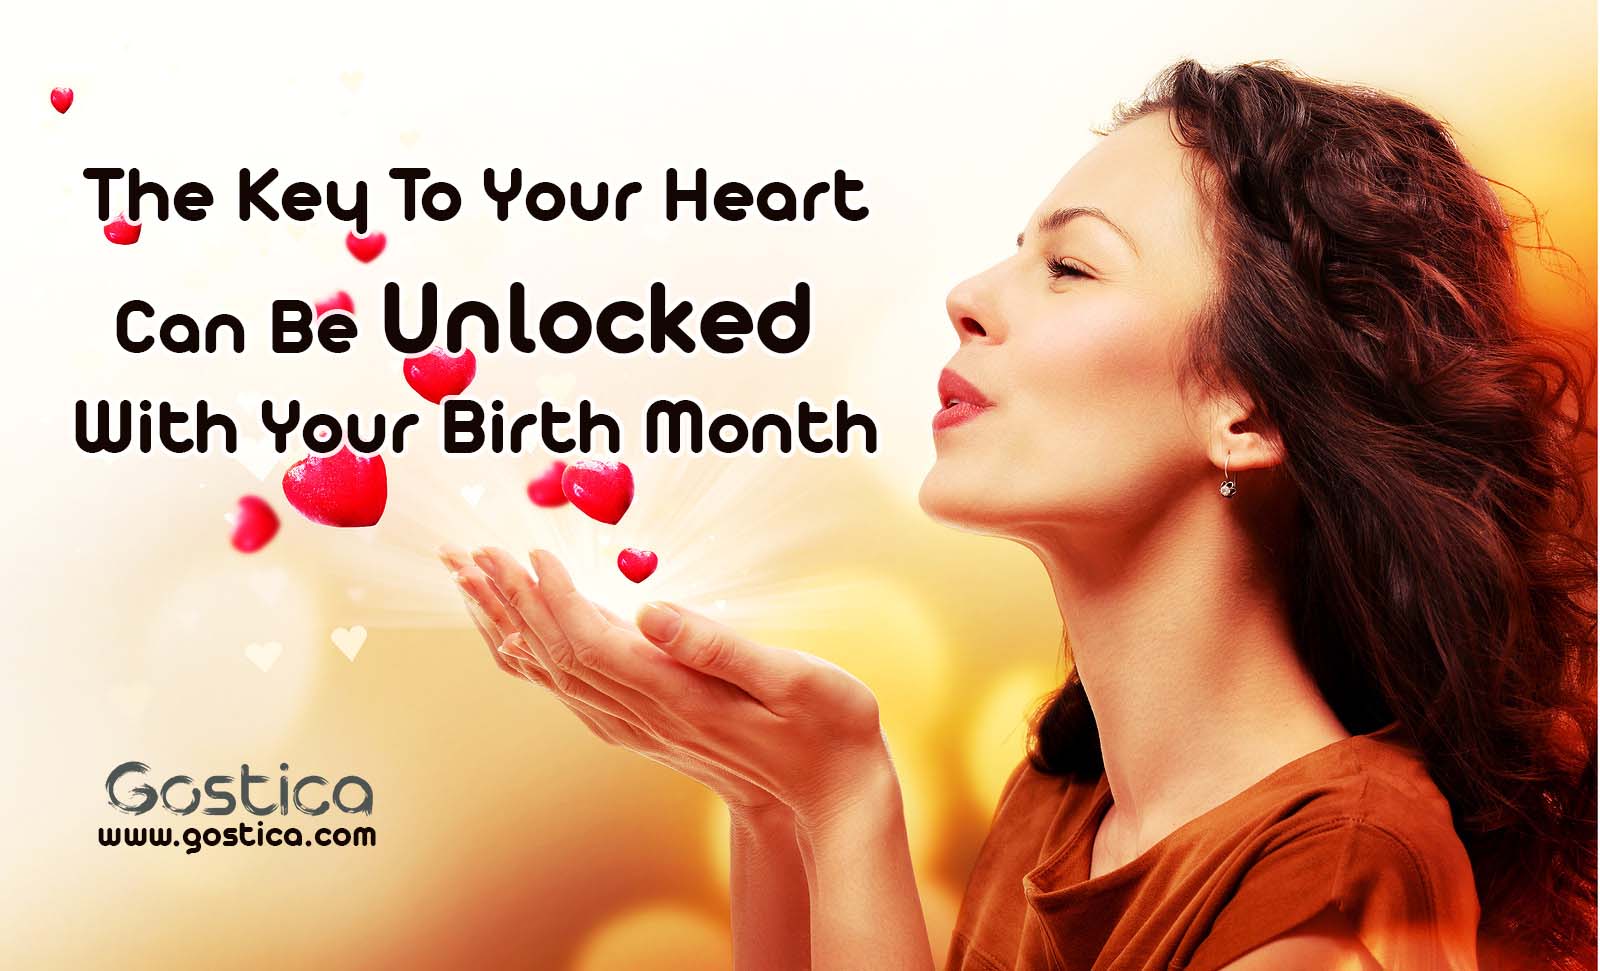 The-Key-To-Your-Heart-Can-Be-Unlocked-With-Your-Birth-Month.jpg